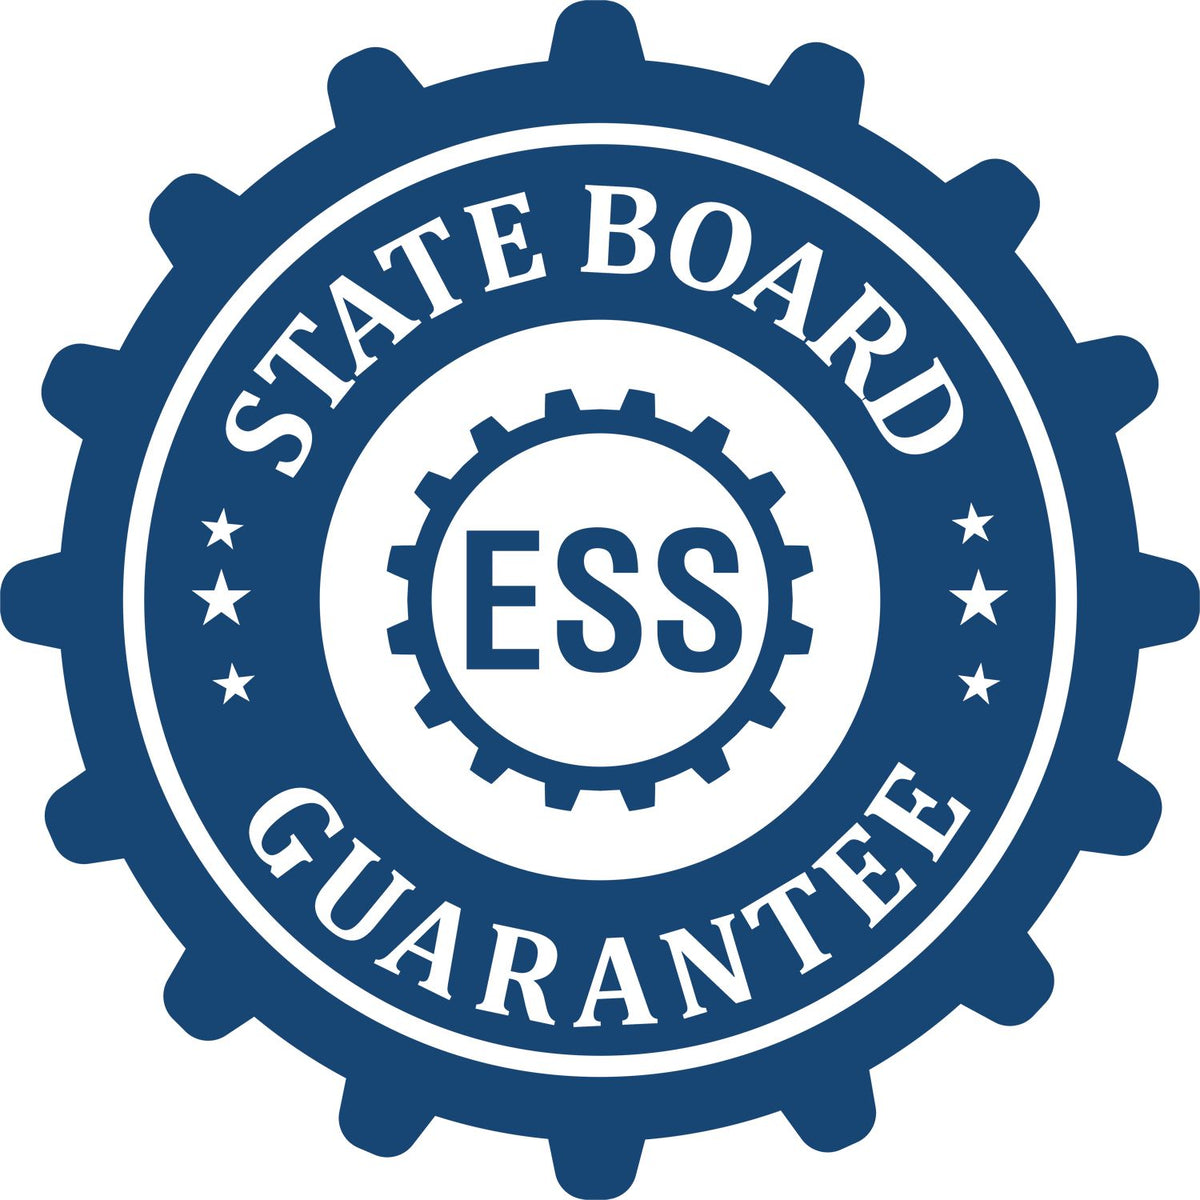 An emblem in a gear shape illustrating a state board guarantee for the Ohio Professional Engineer Seal Stamp product.